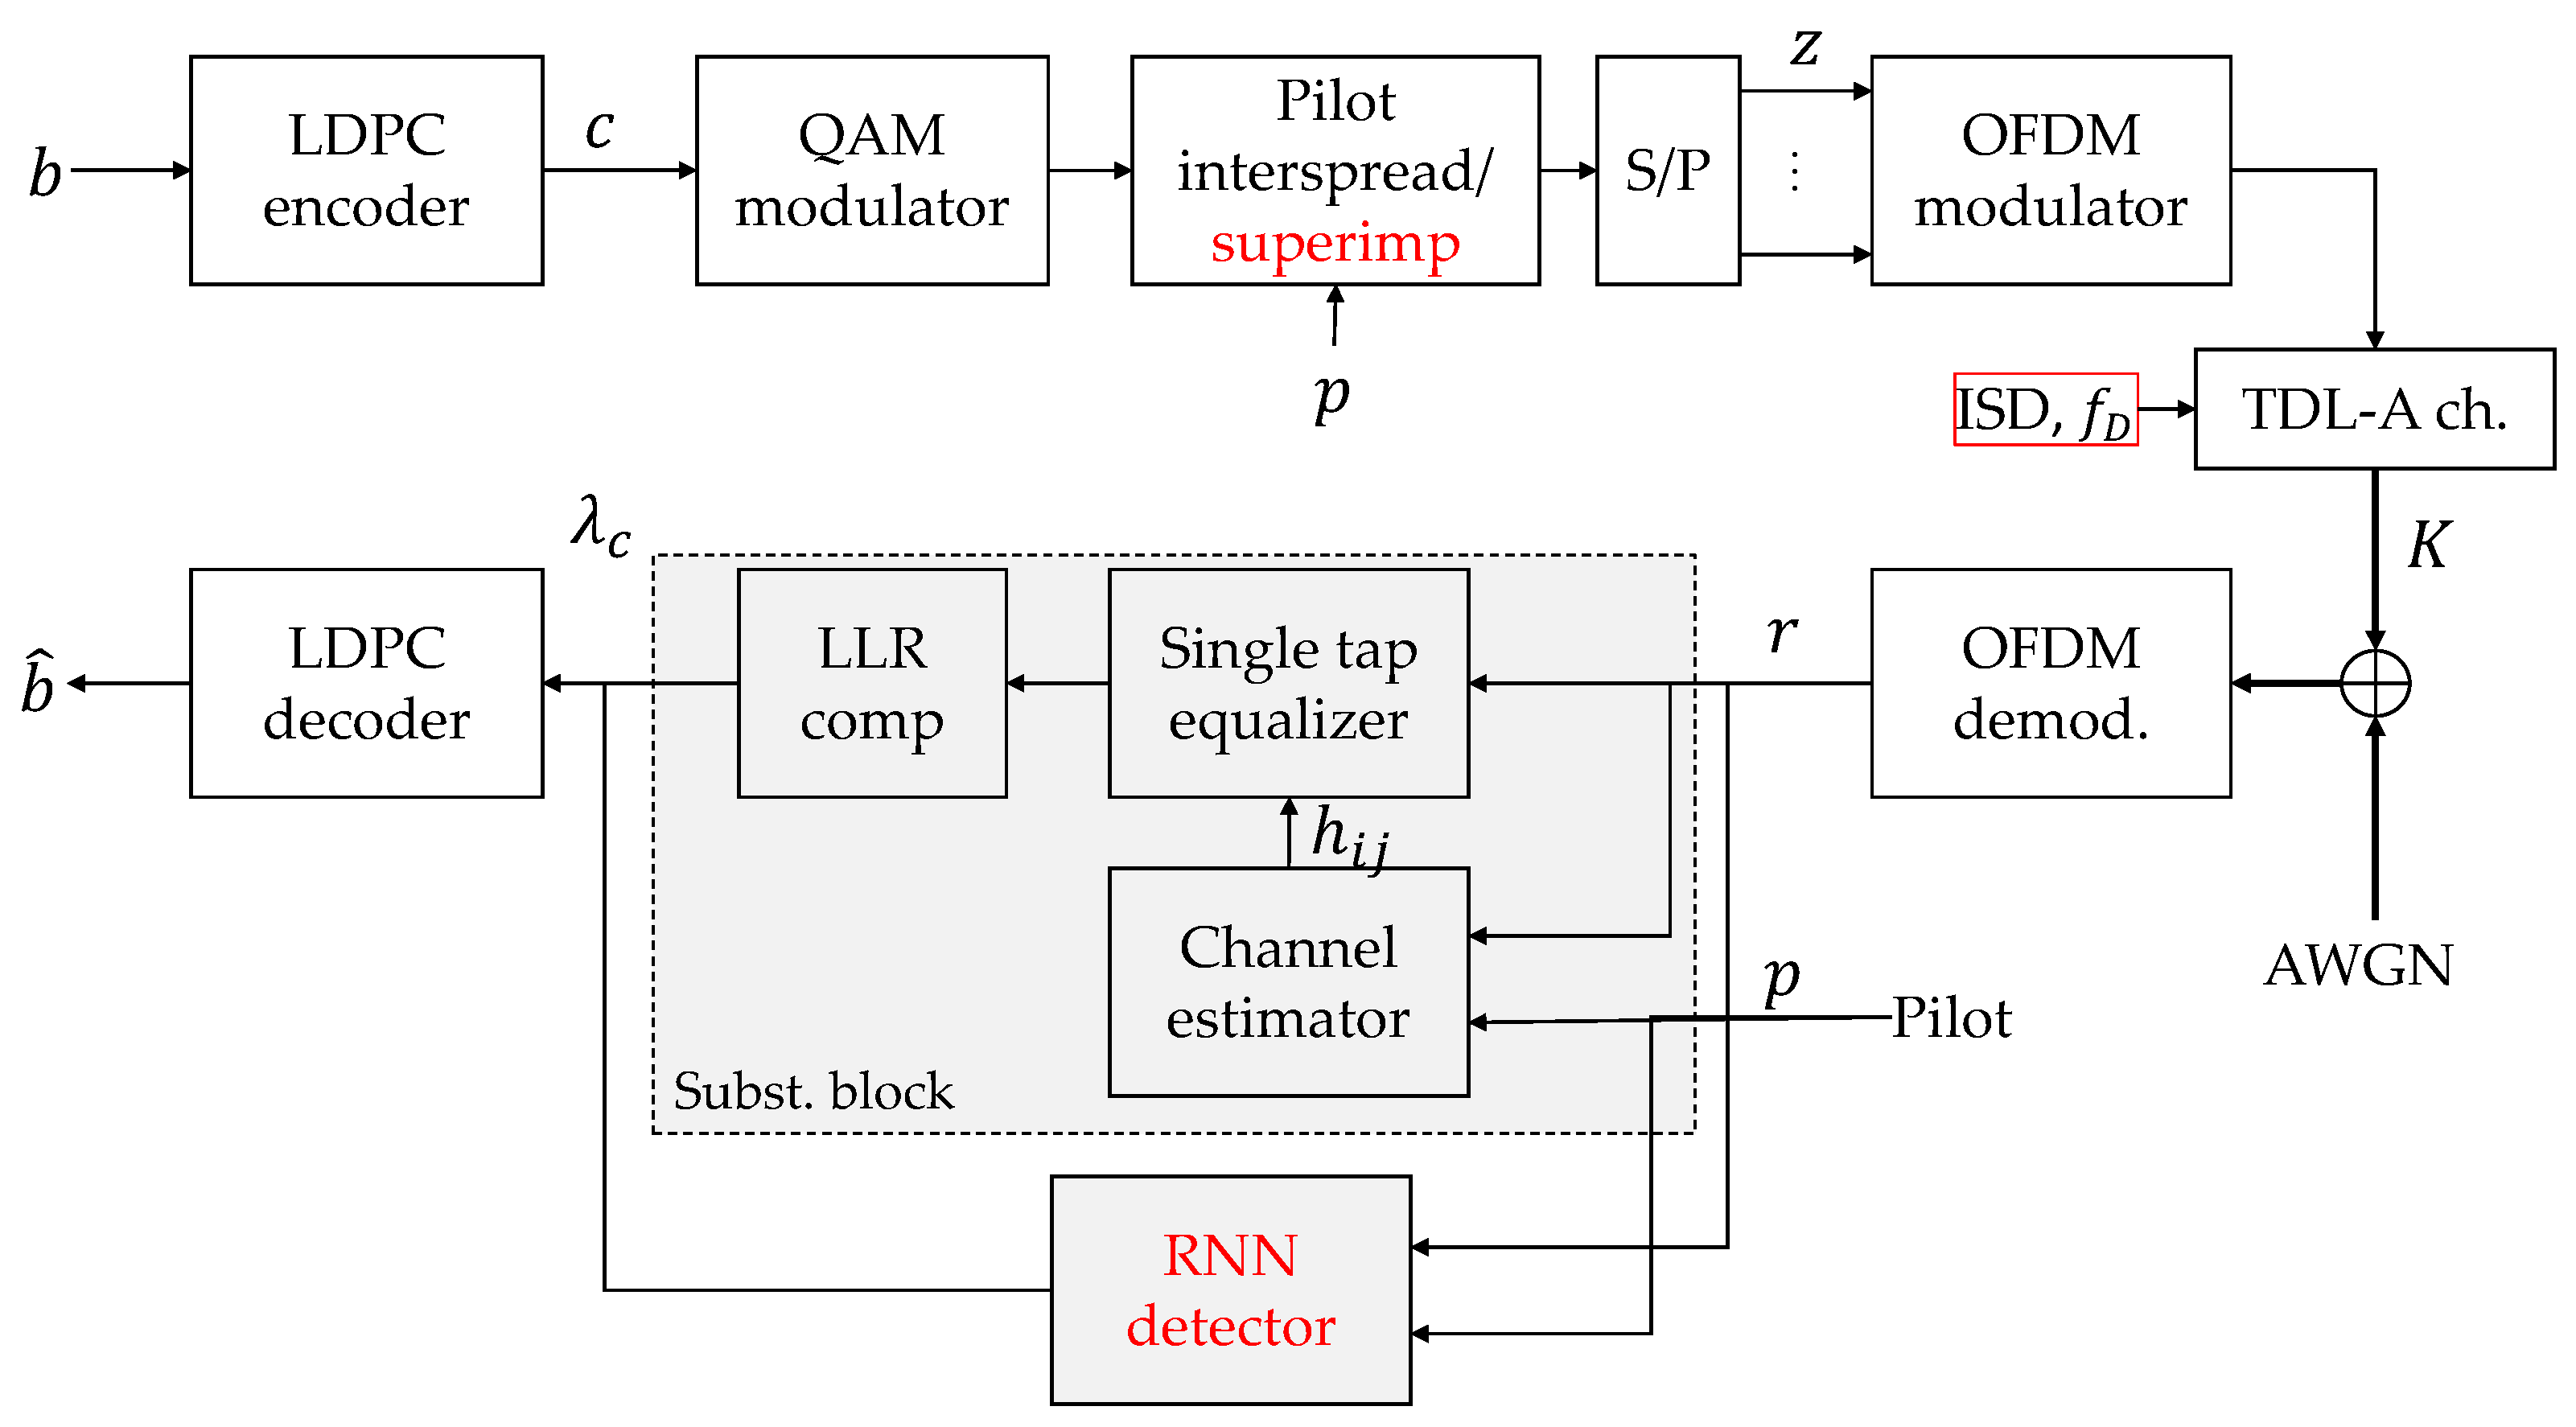 1: Block diagram of a DVB T2 end to end chain